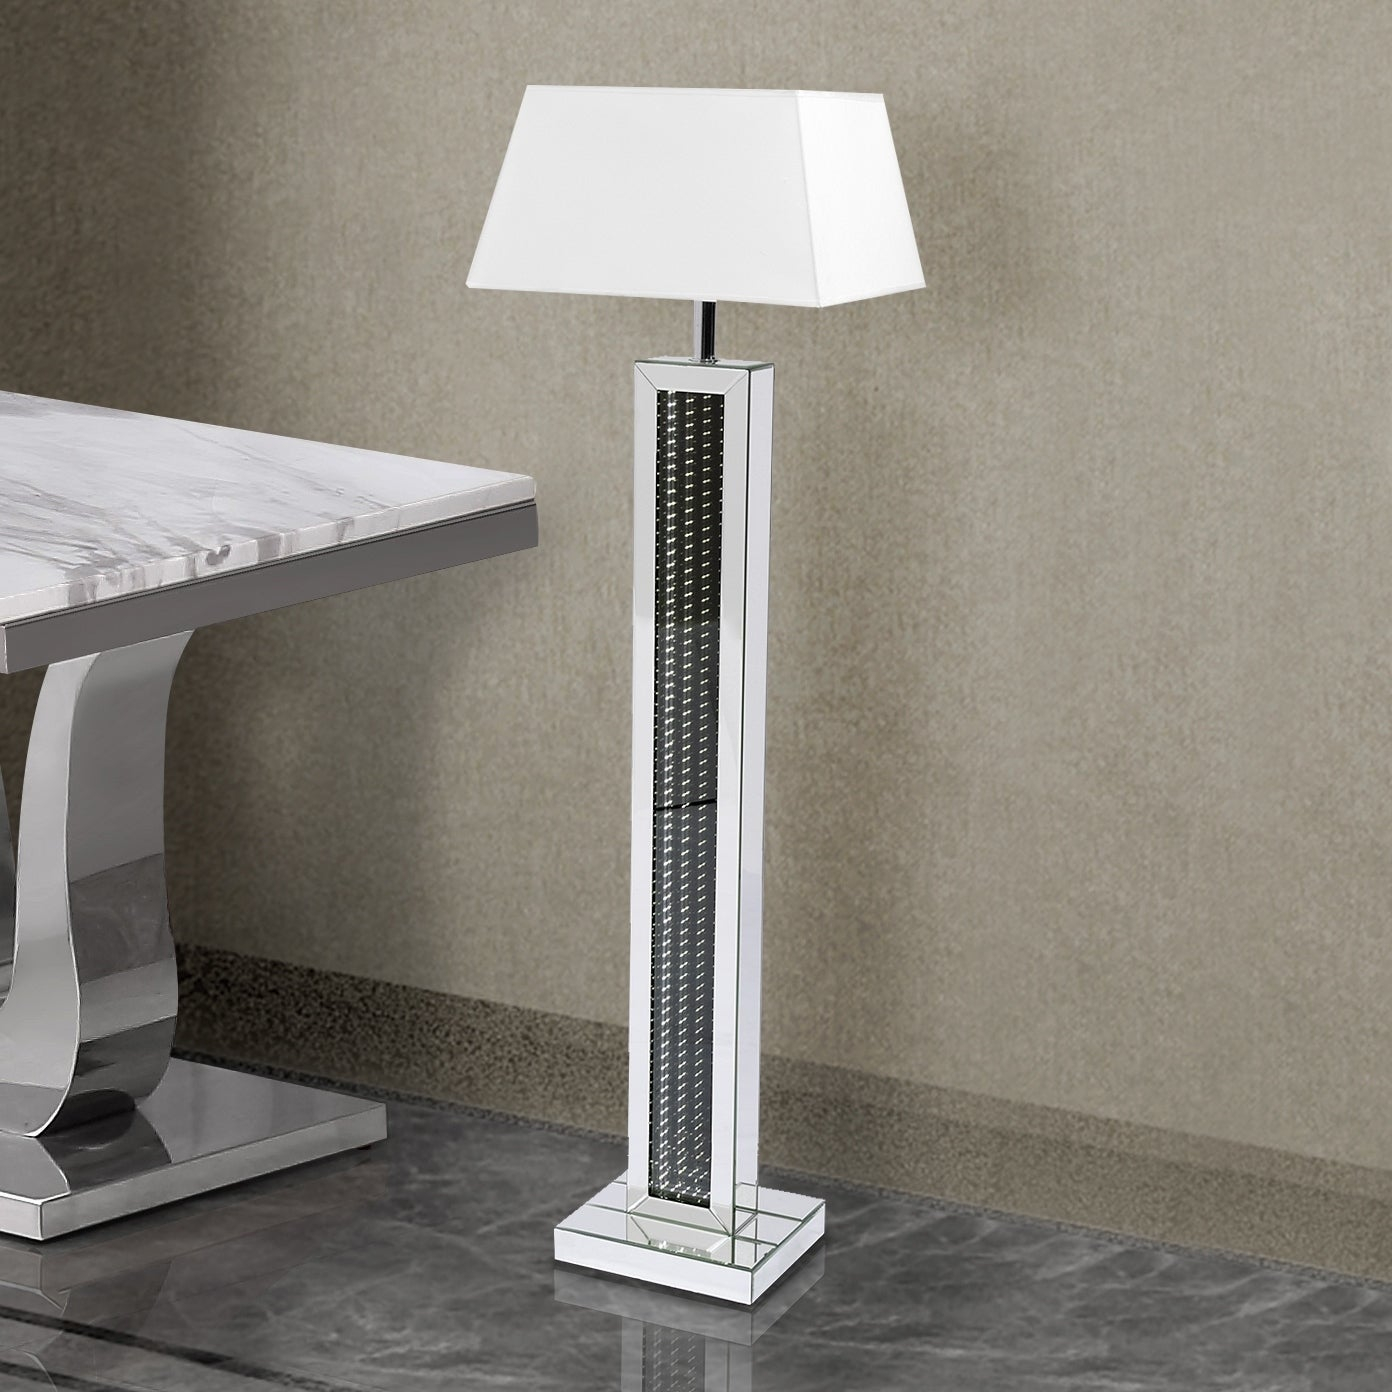 Best Quality Furniture Mirrored Floor Lamp And Shade With Led Accent with sizing 1392 X 1392